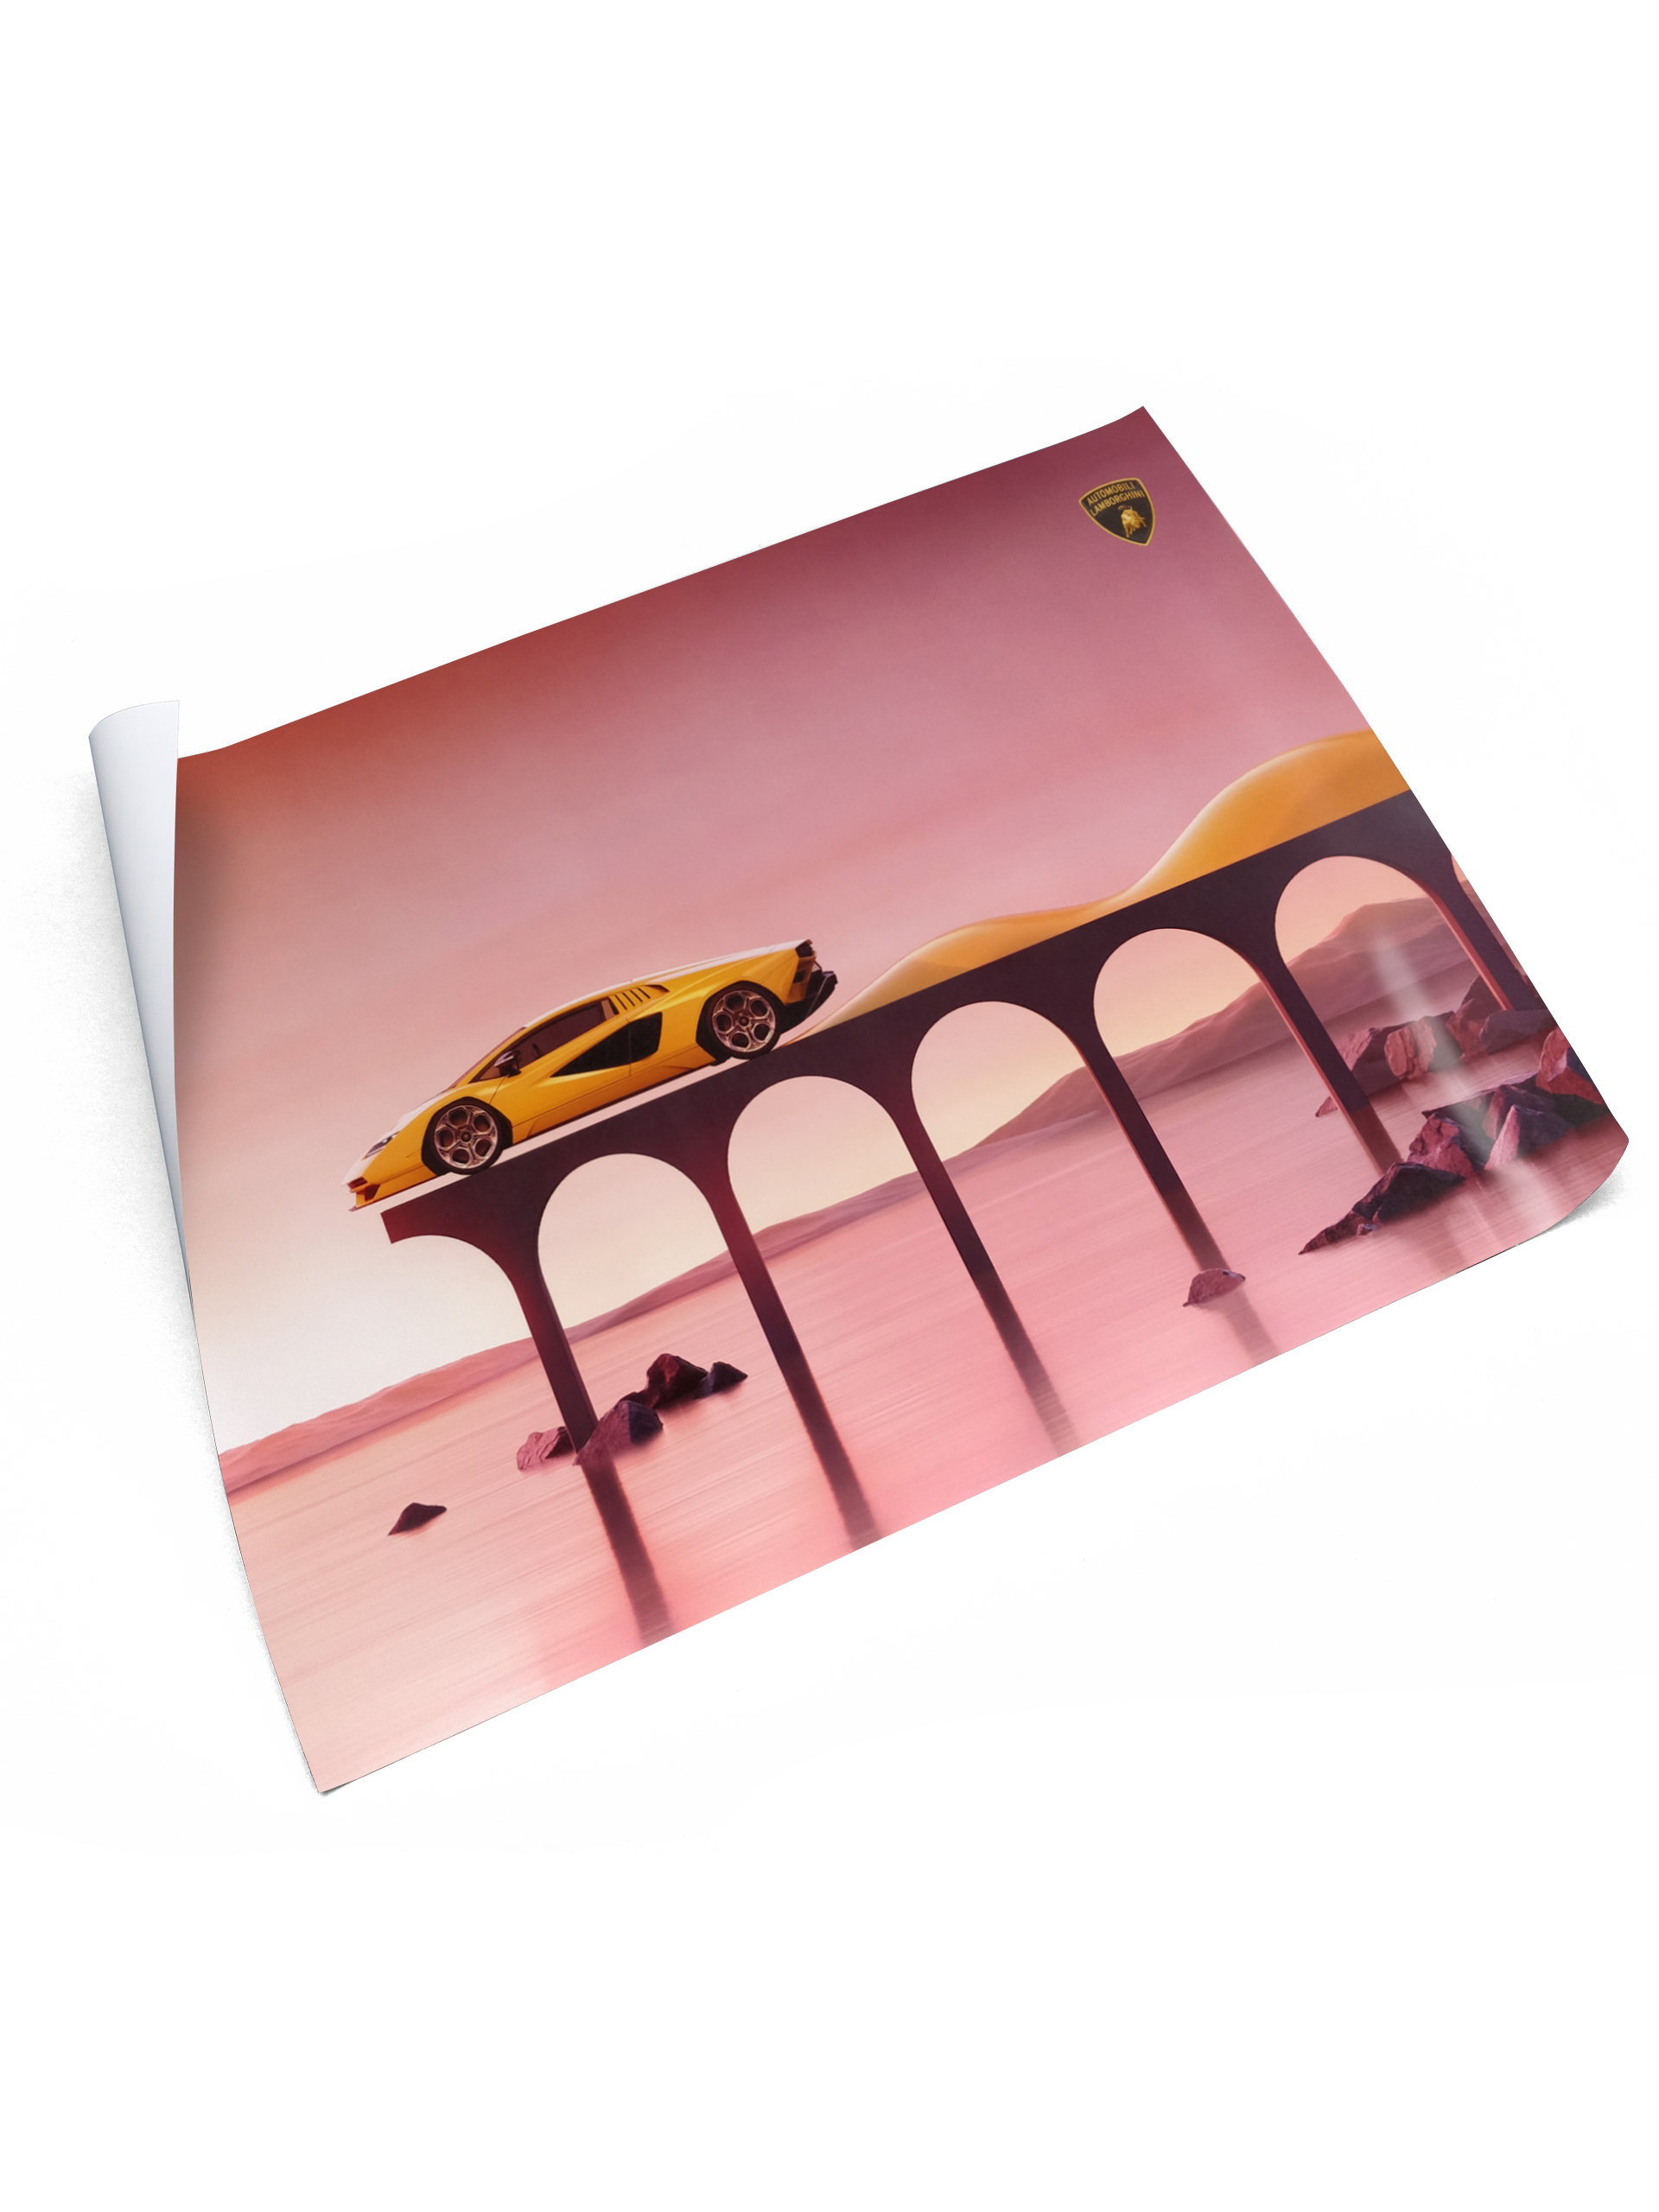 LAMBORGHINI COUNTACH LPI 800-4 SPECIAL EDITION POSTER BY ANDREAS WANNERSTEDT